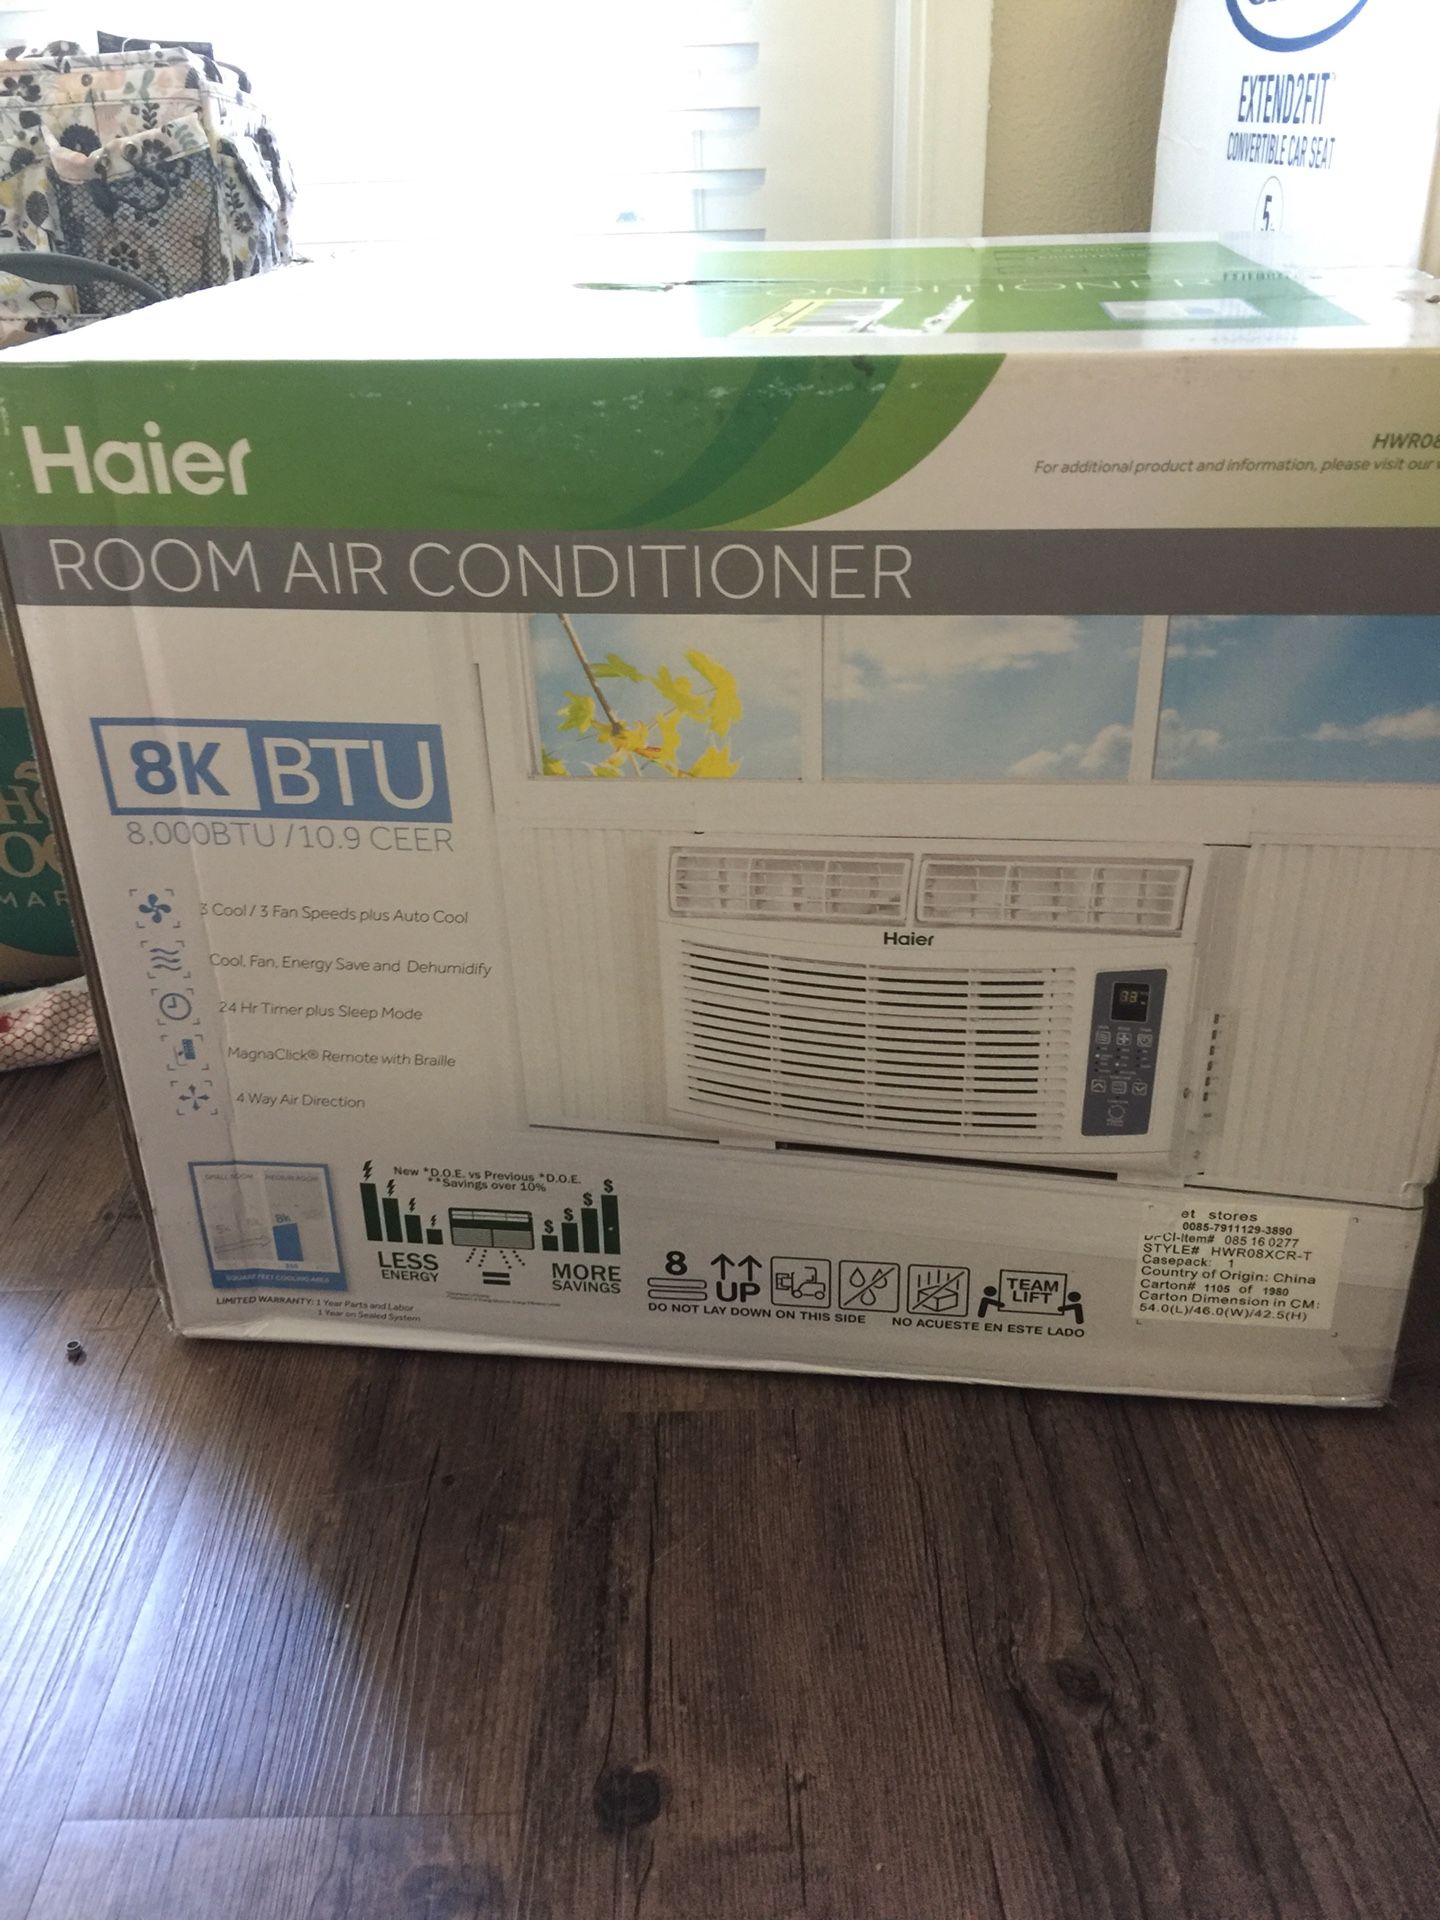 Haier room air conditioner